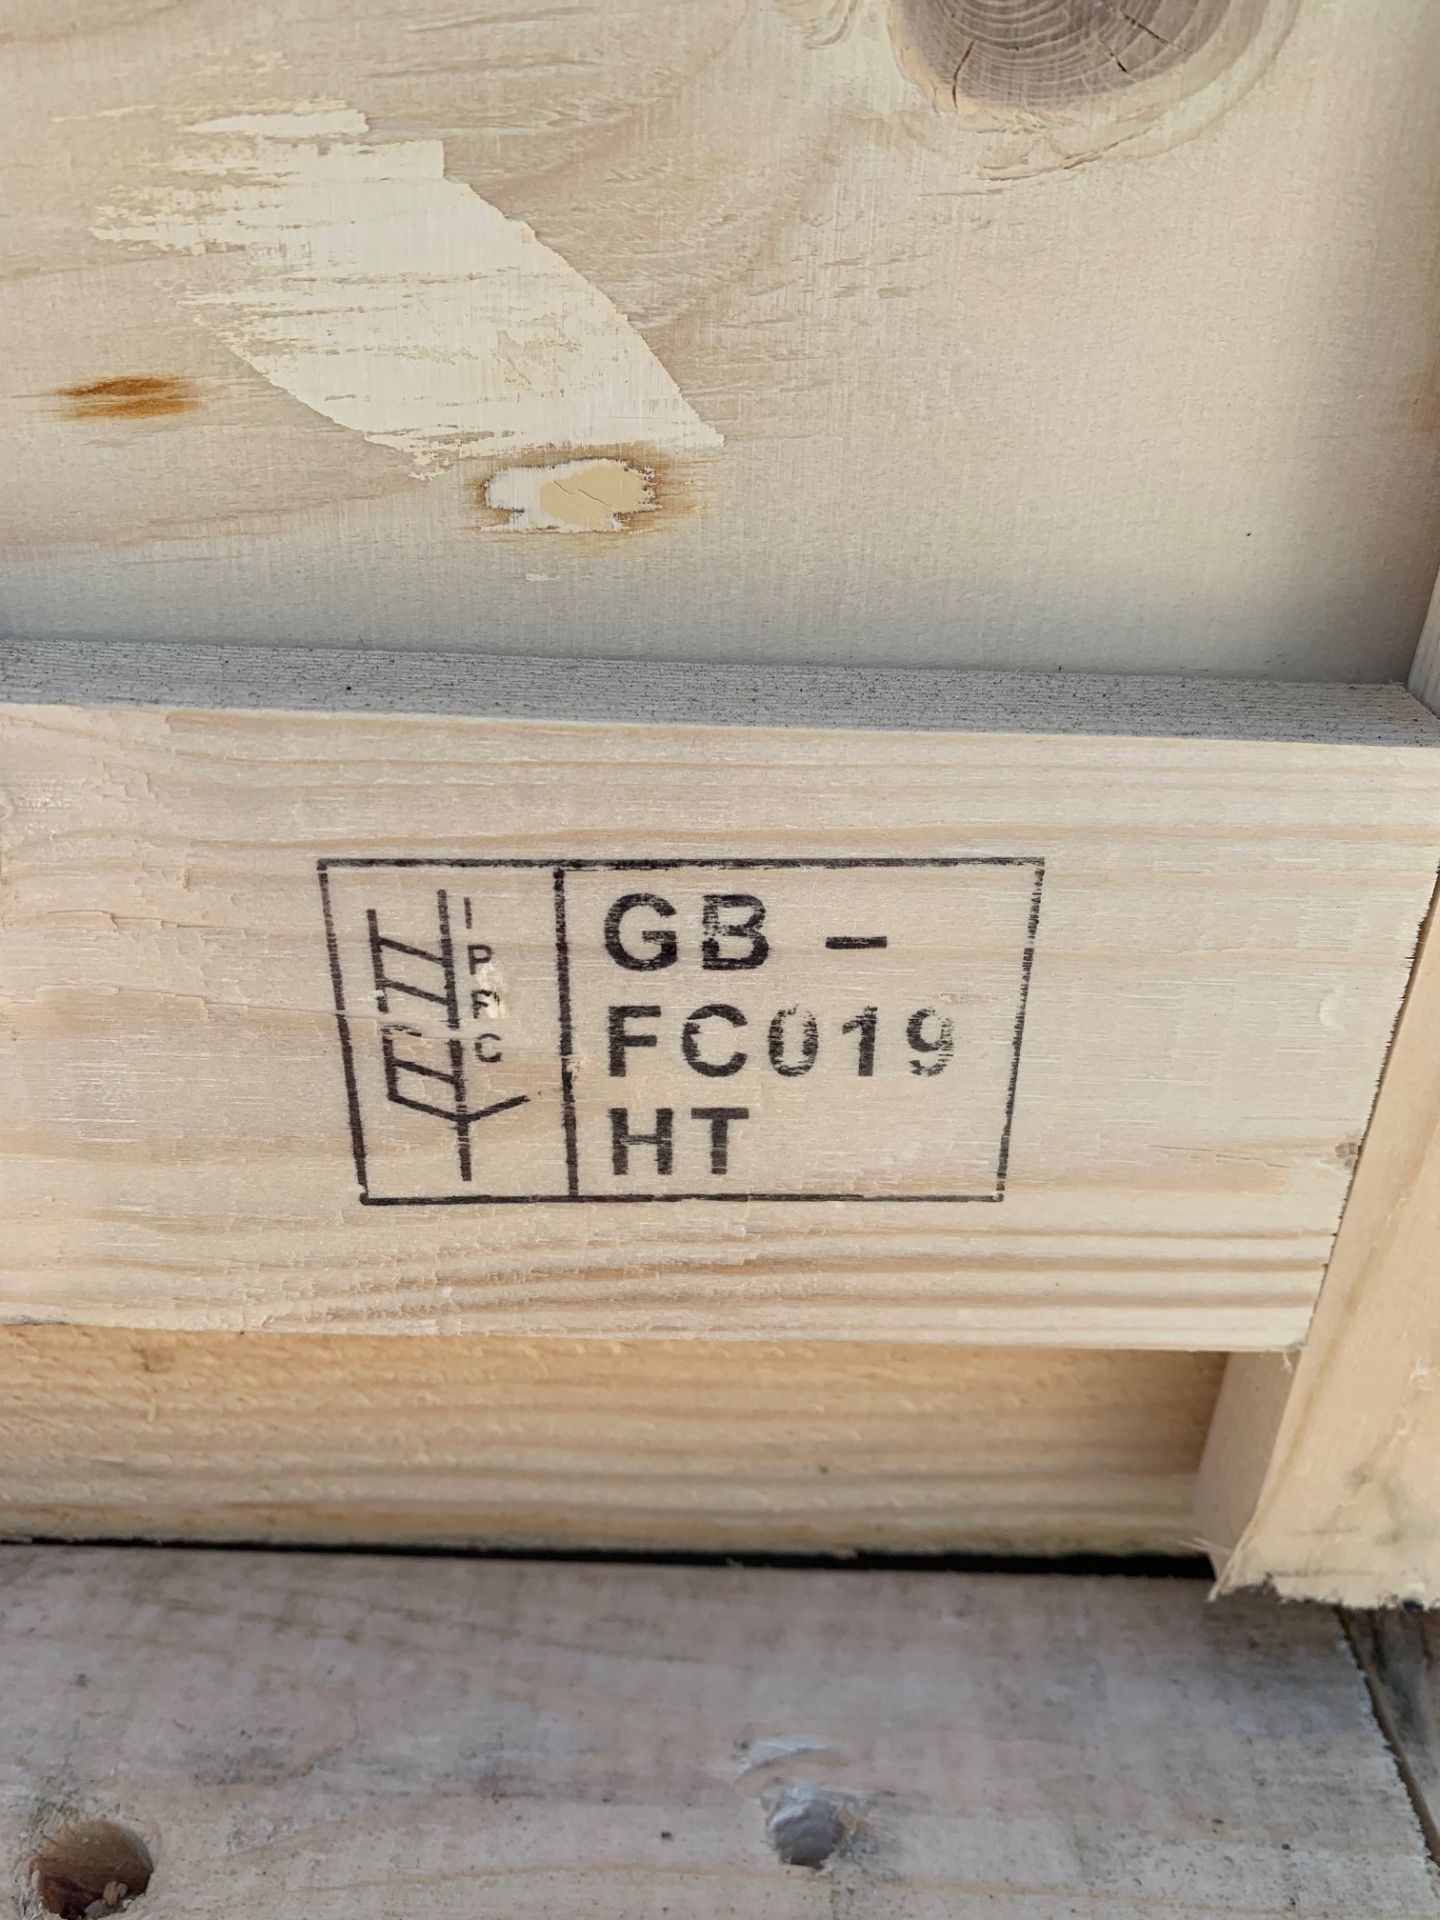 5x Wooden Shipping crates - External Dimensions - L122 x W89 x H43 - Image 7 of 7